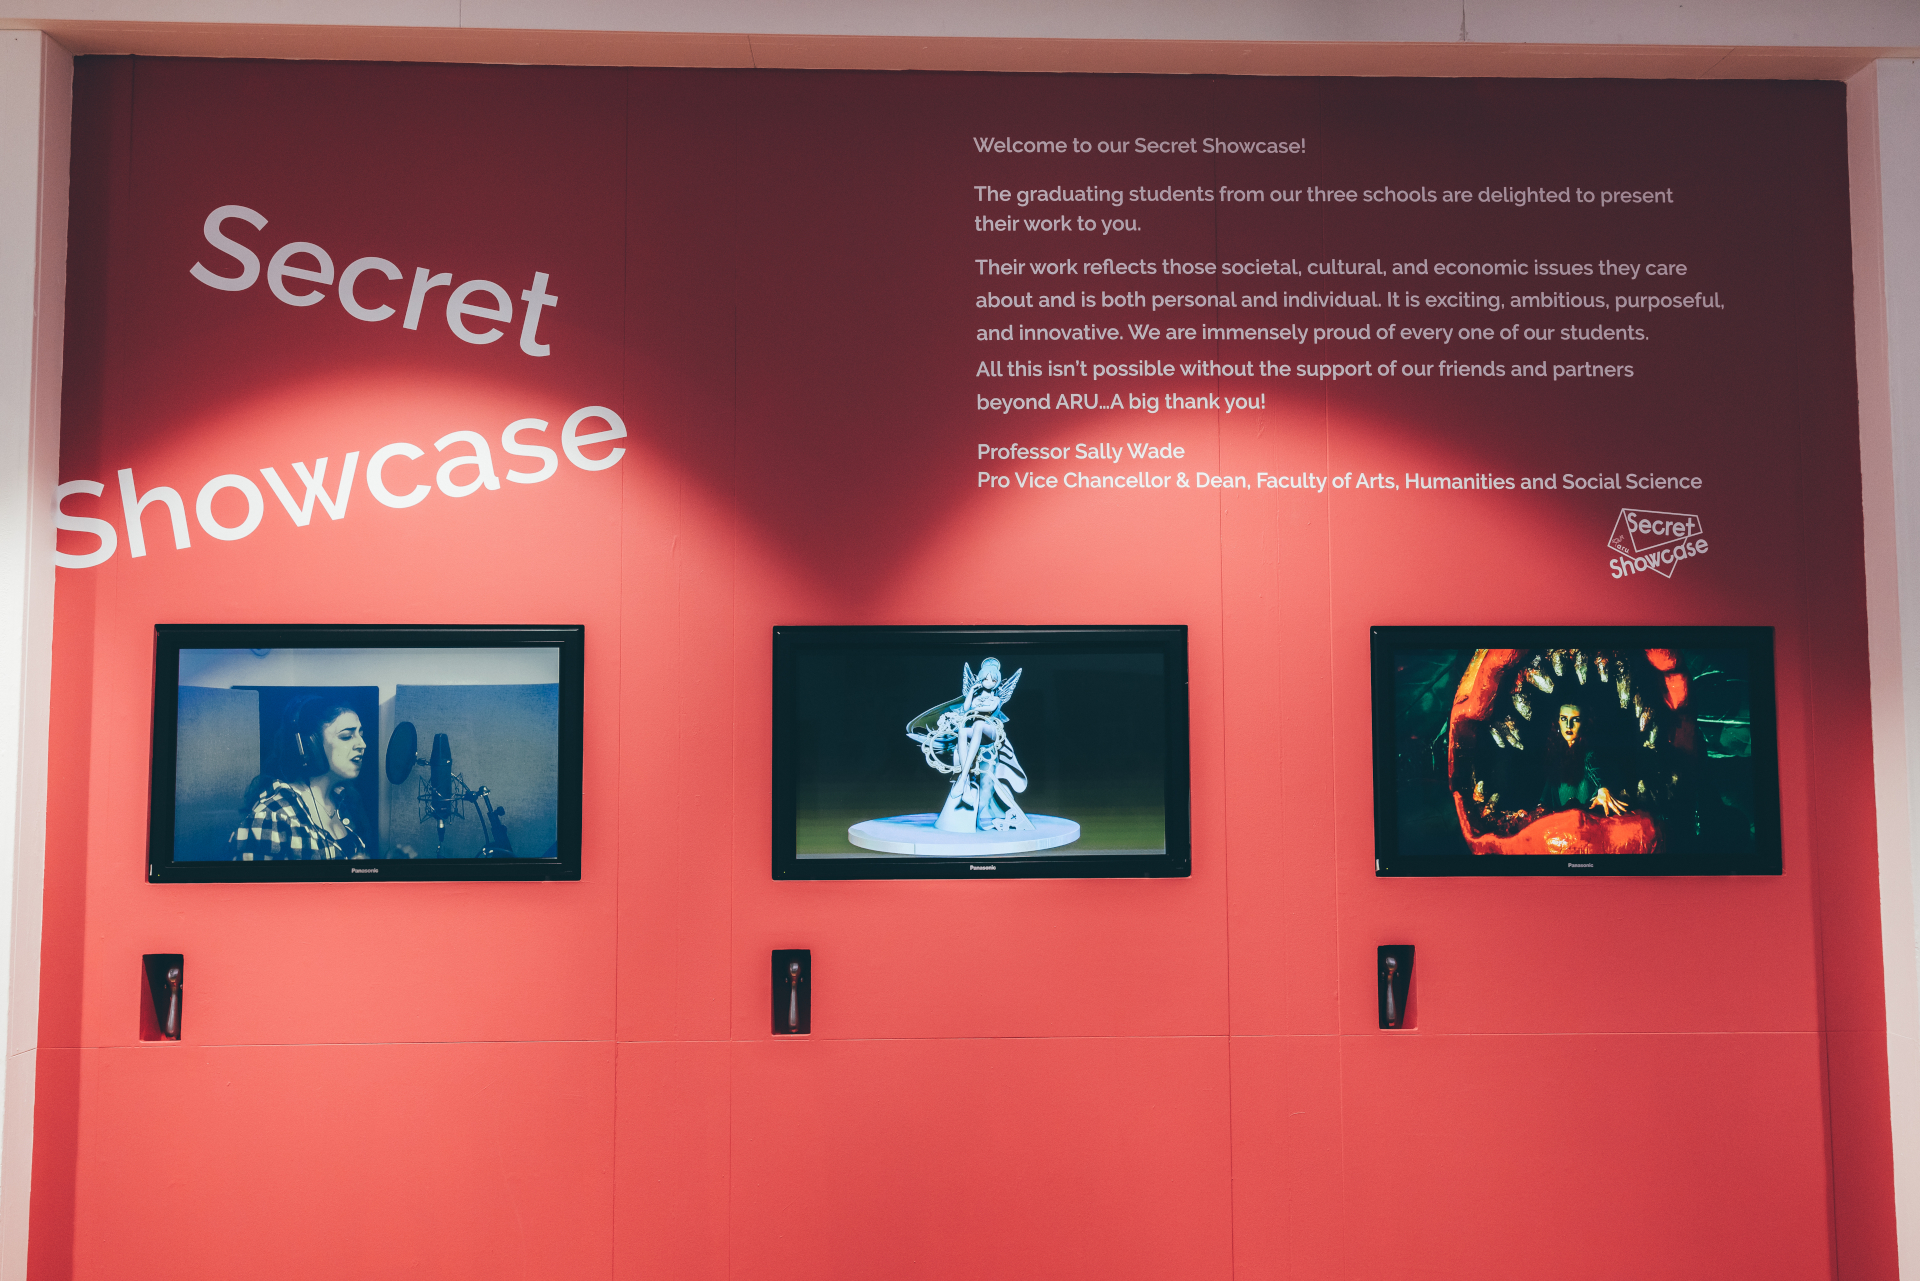 Three video screens embedded into red wall below Secret Showcase title and intro text